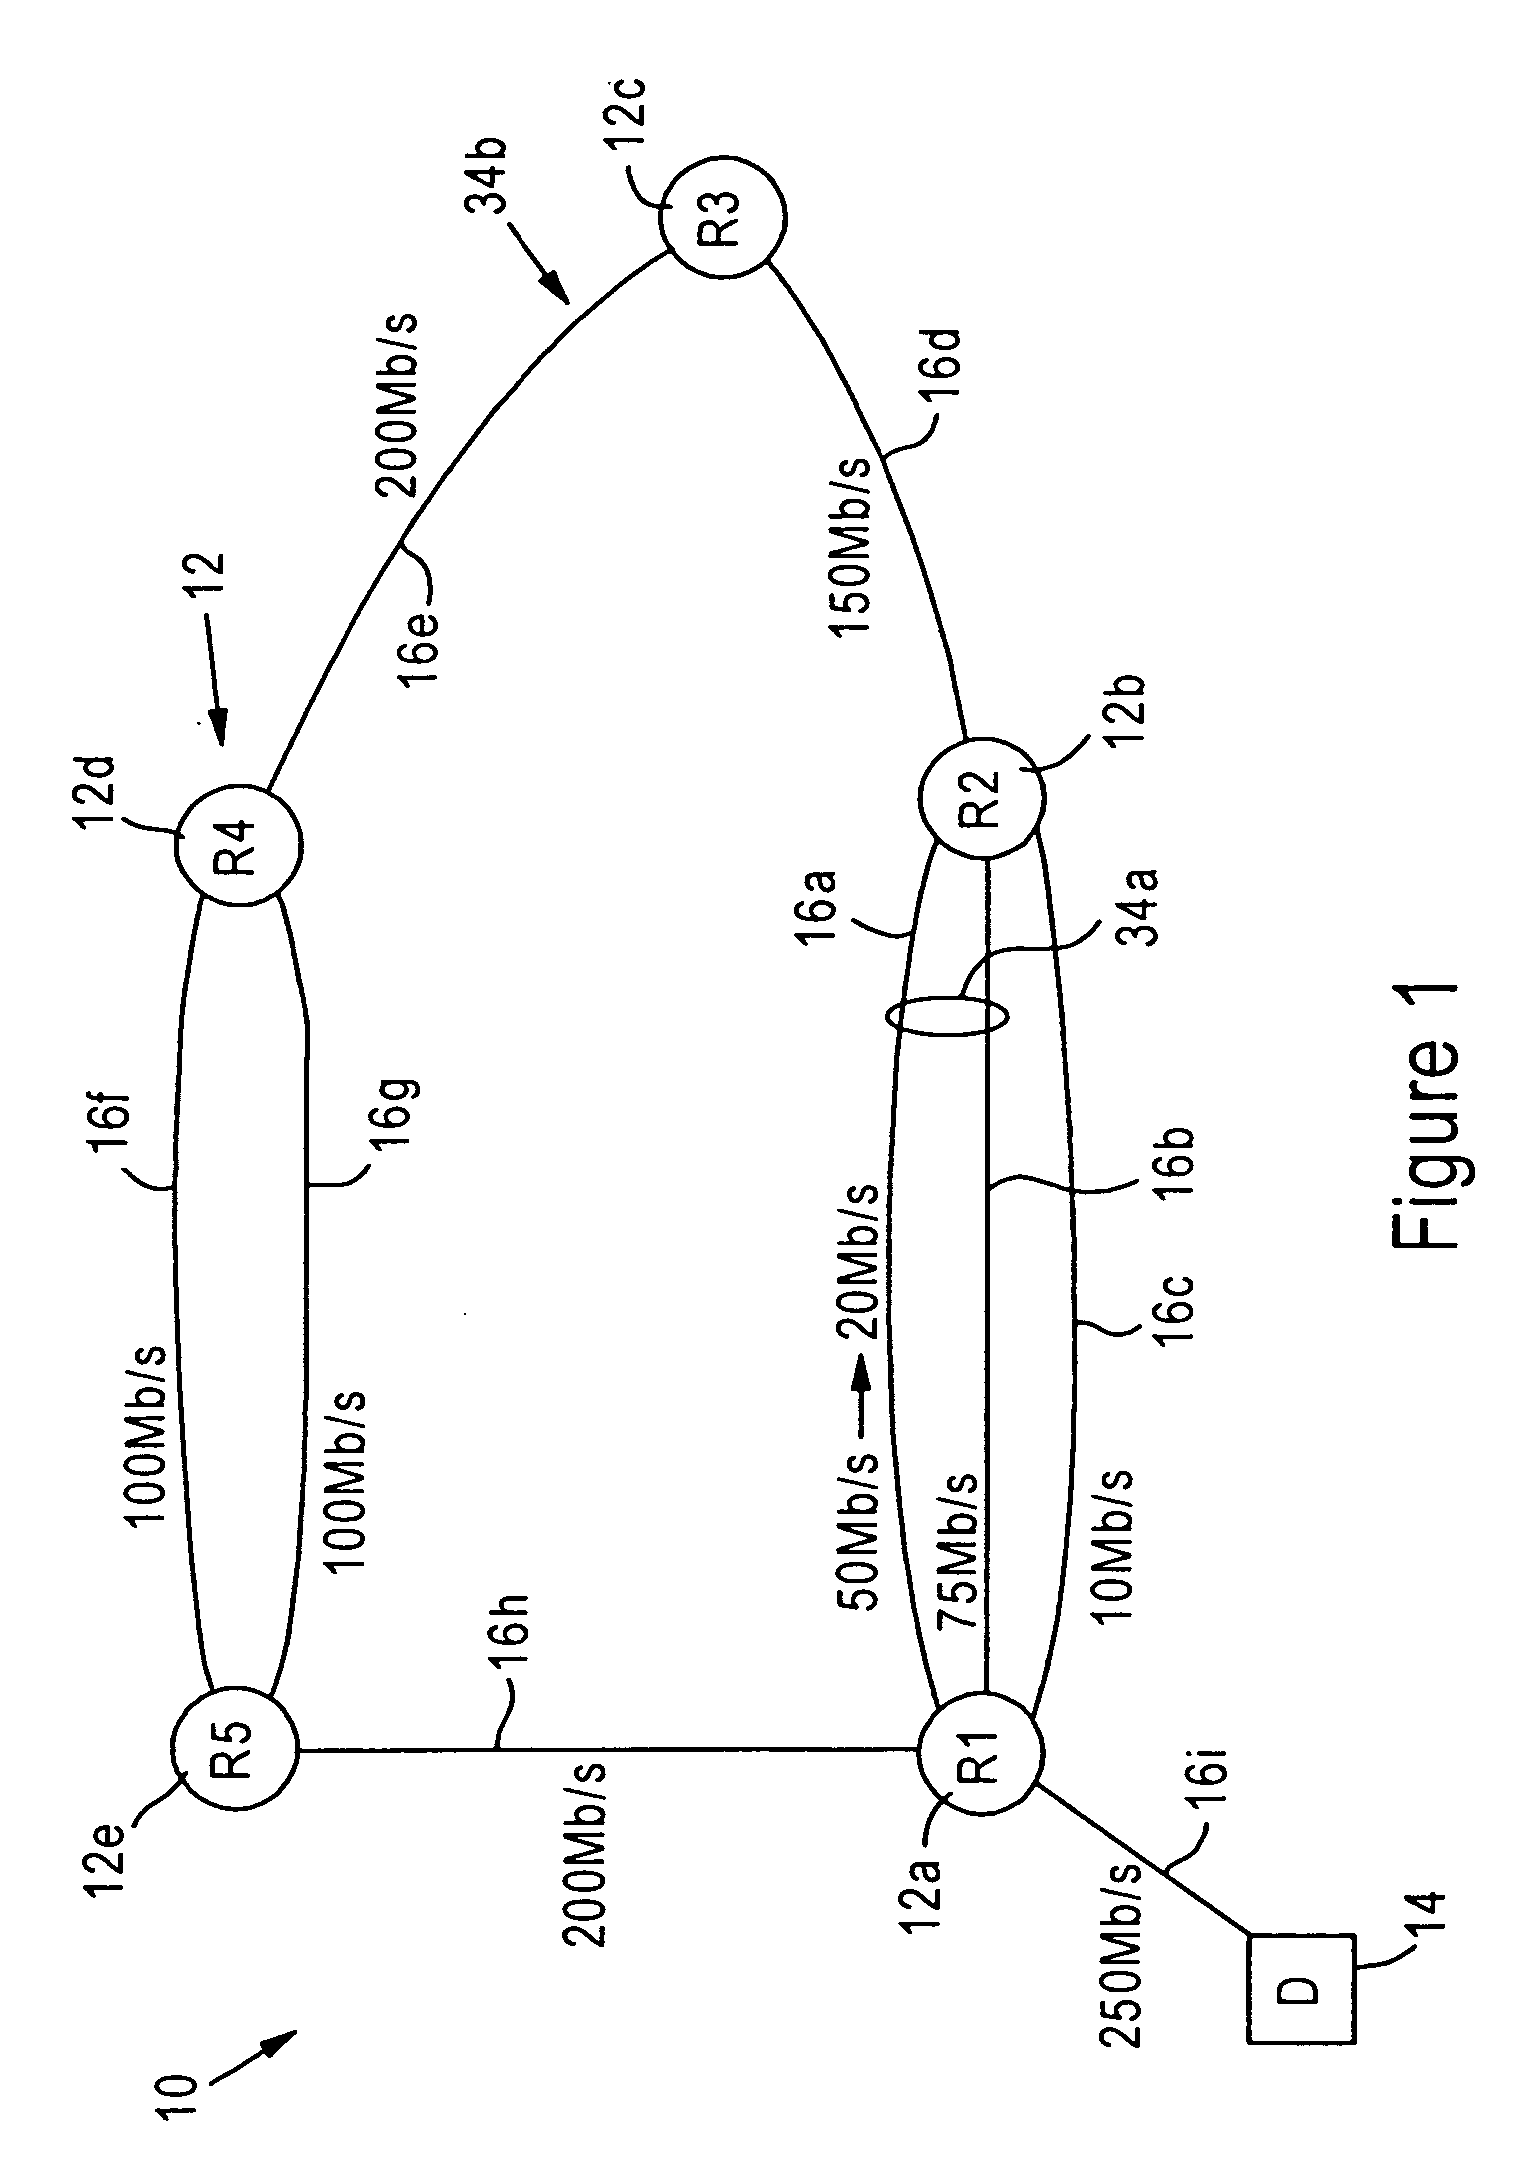 Router configured for outputting update messages specifying a detected attribute change of a connected active path according to a prescribed routing protocol